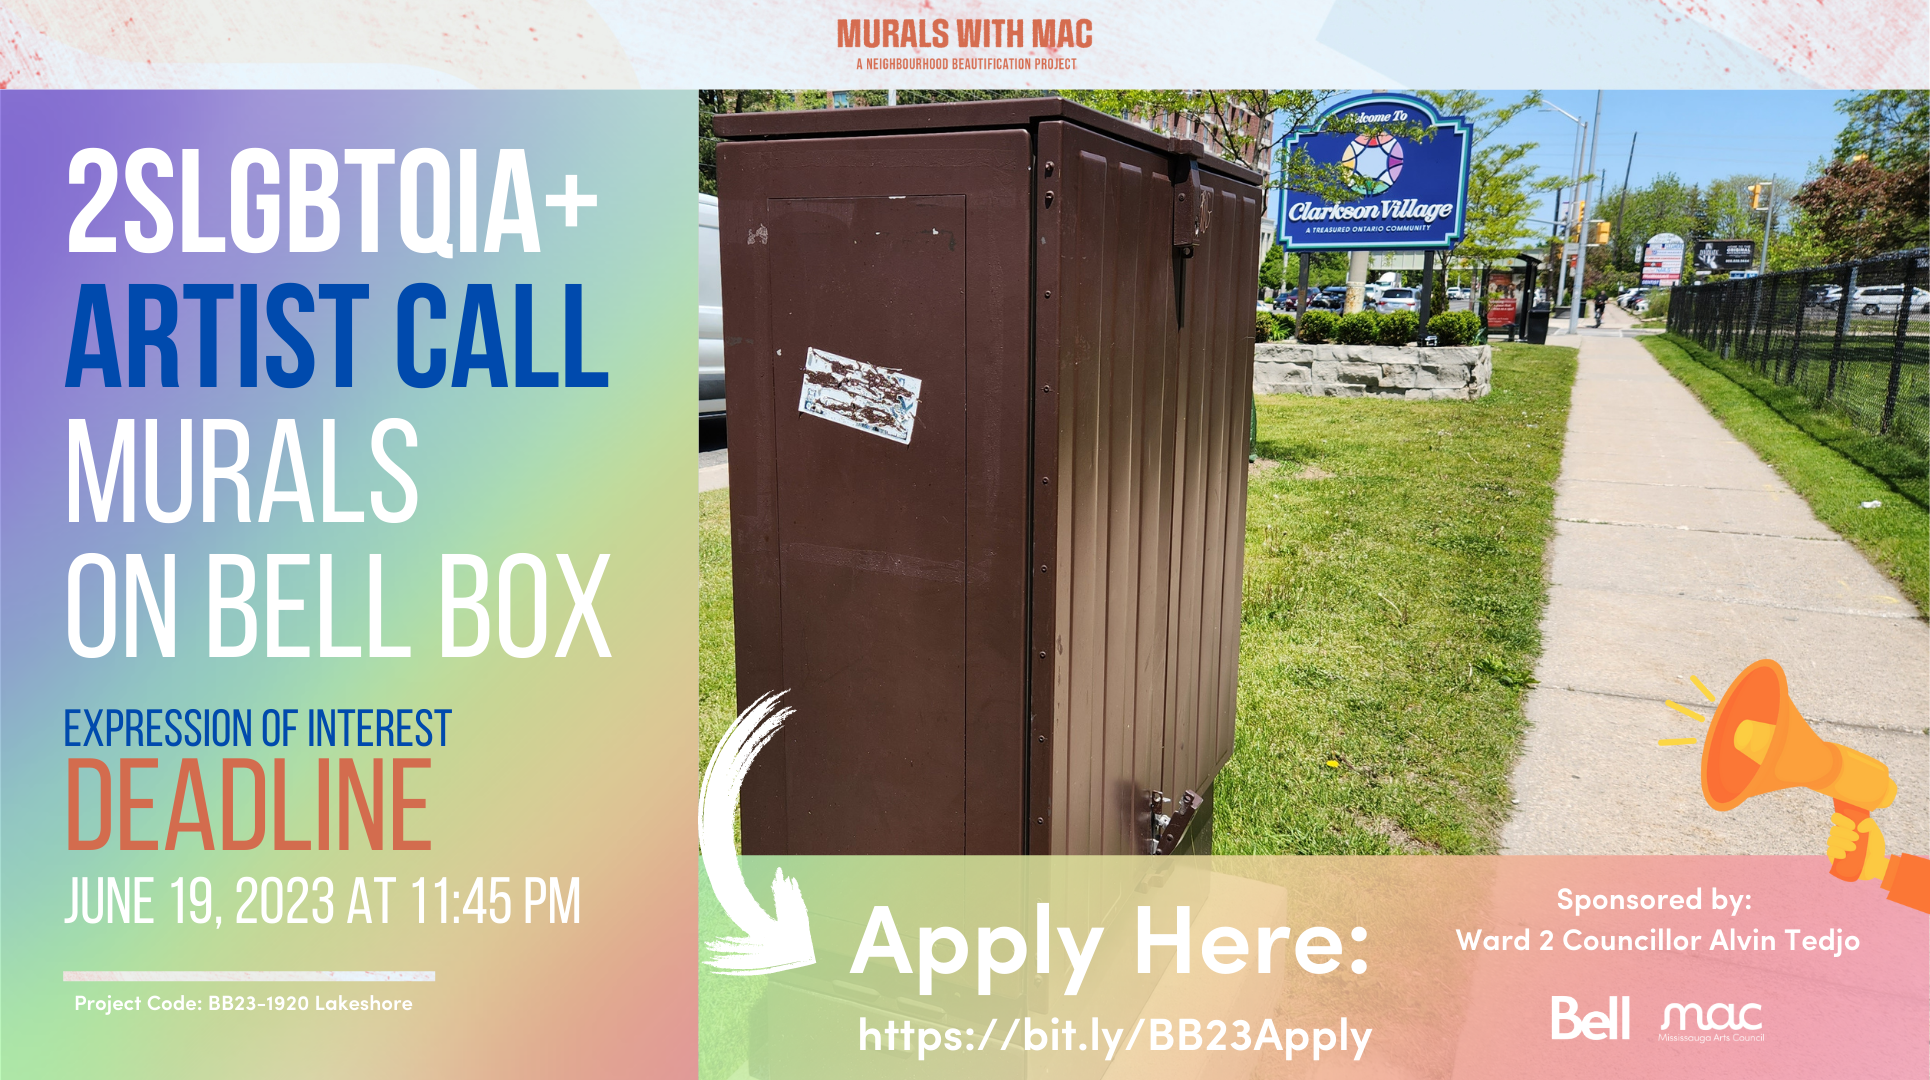 Mississauga Arts Council: Call for 2SLGBTQIA+ Artists – Mural on Bell Box